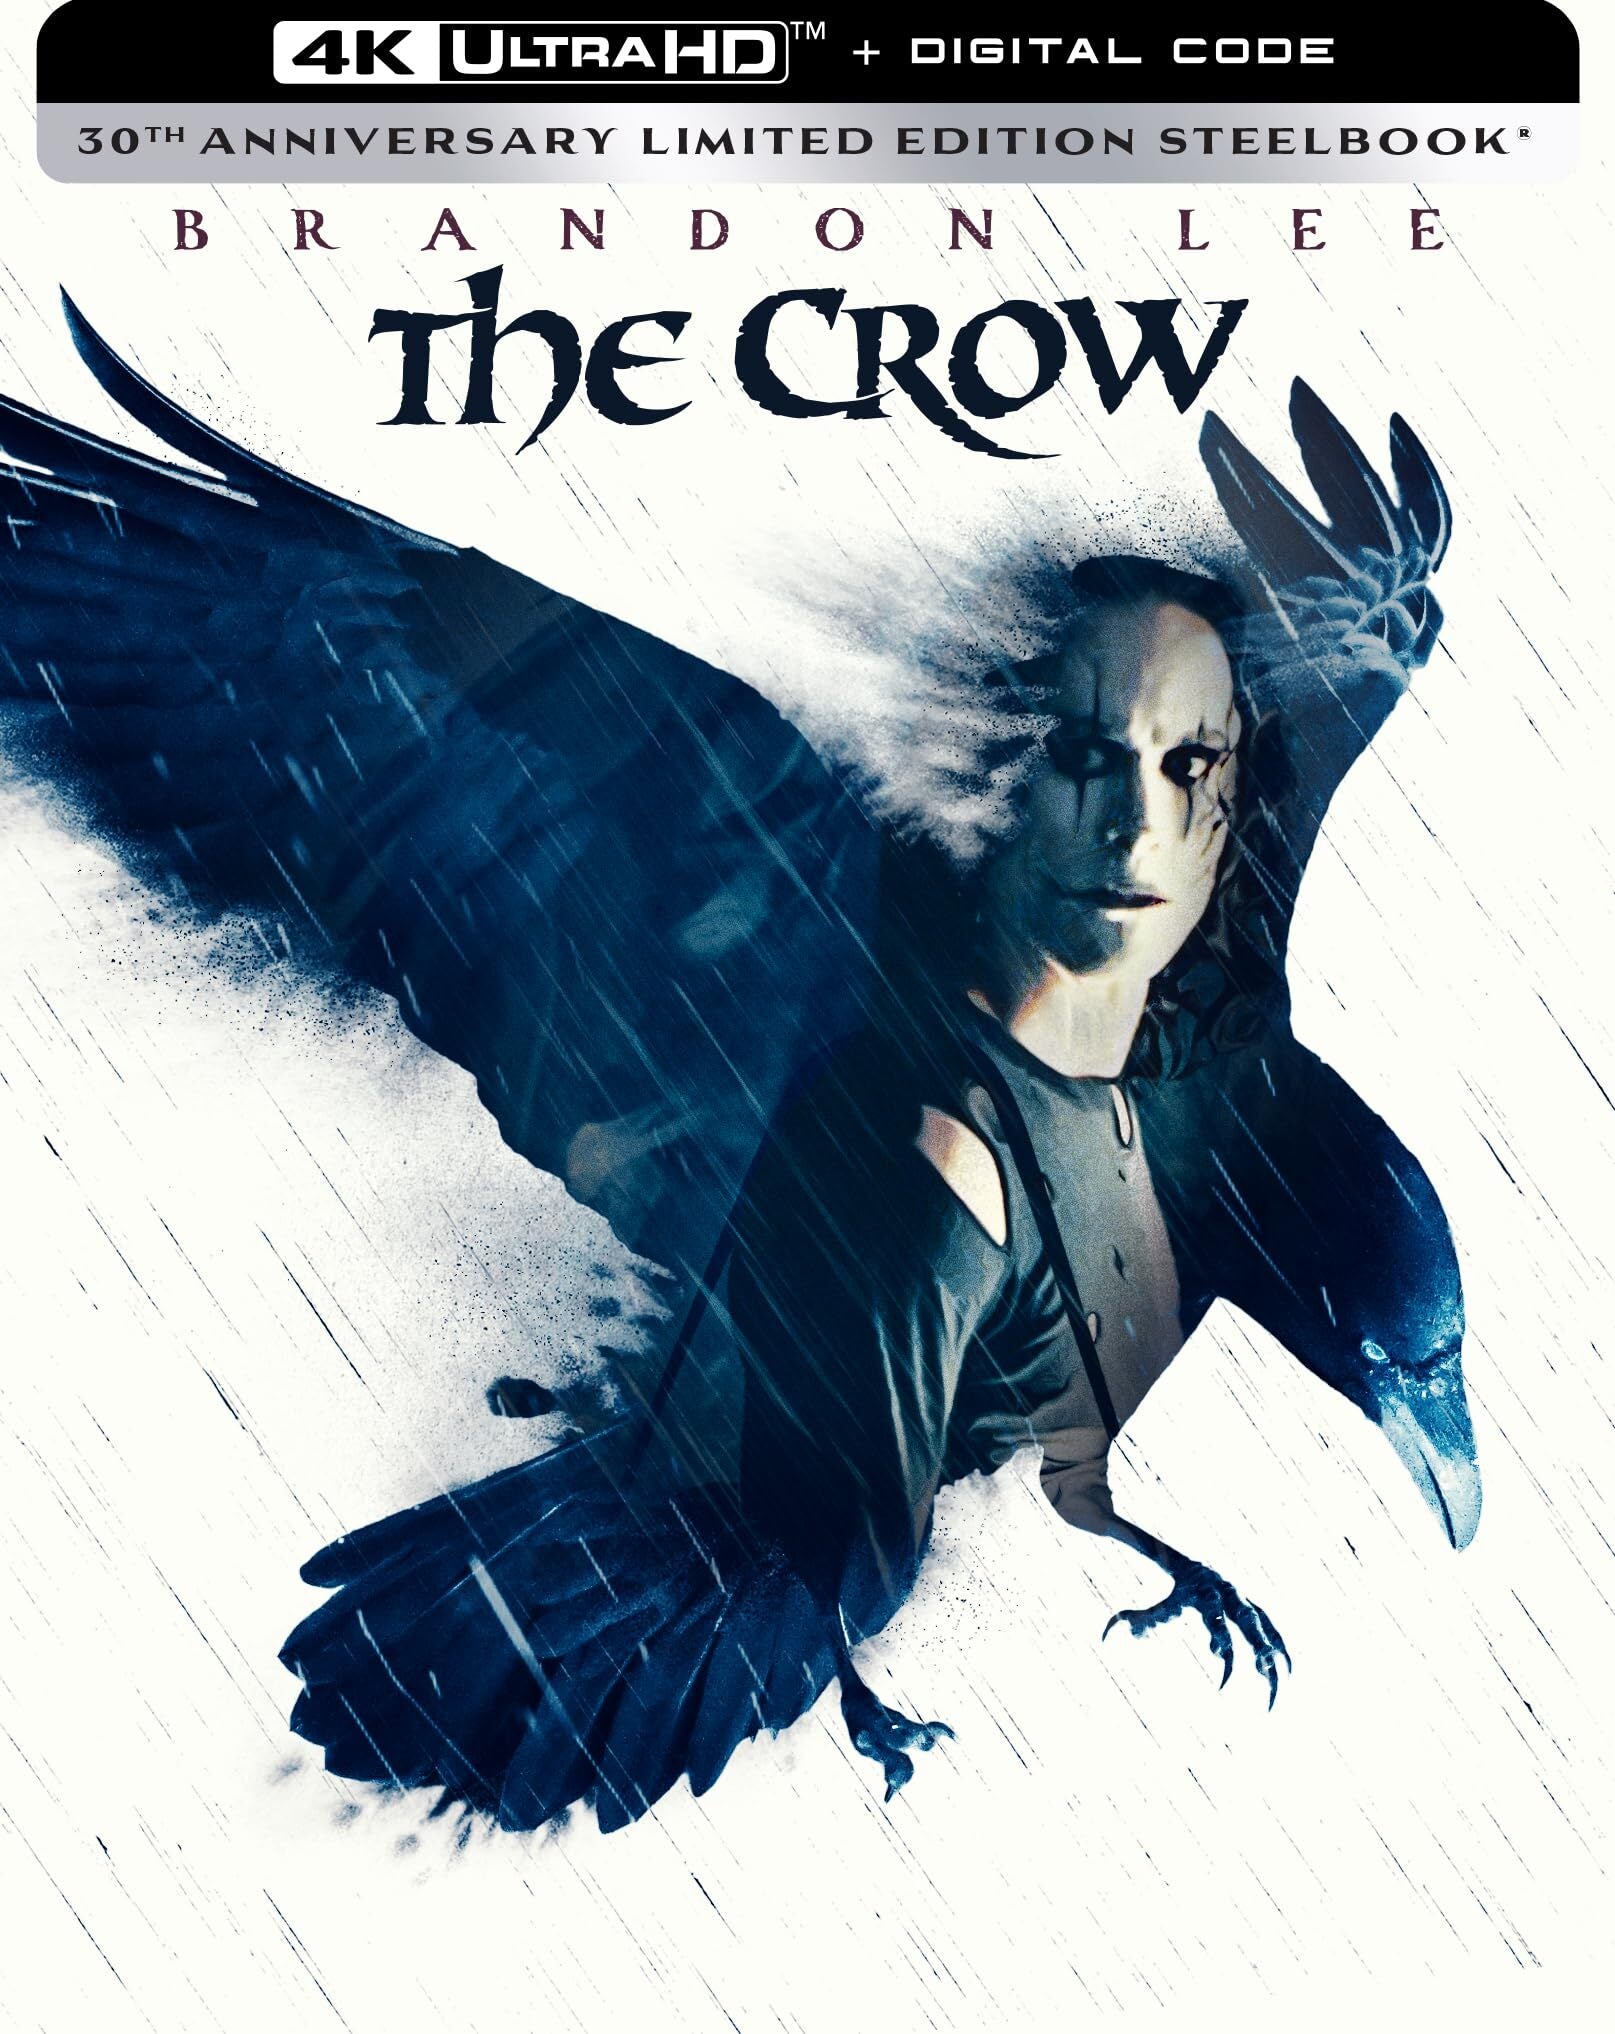 THE CROW (LIMITED EDITION) 4K UHD STEELBOOK [SCRATCH AND DENT]